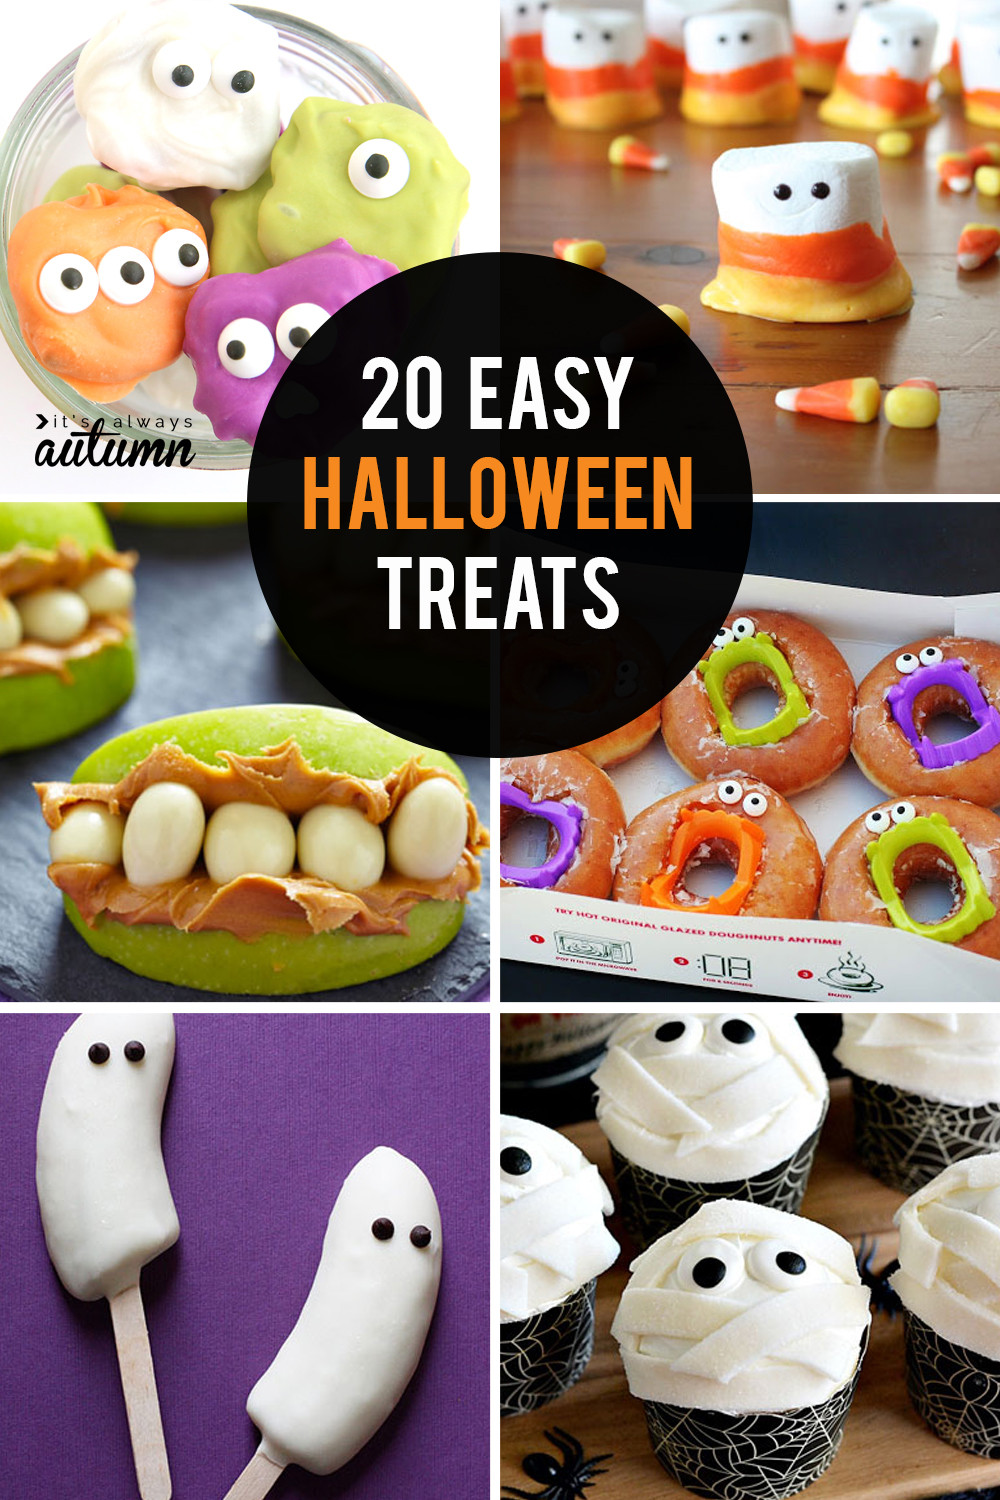 Halloween Treat Ideas For Kids
 20 fun easy Halloween treats to make with your kids It